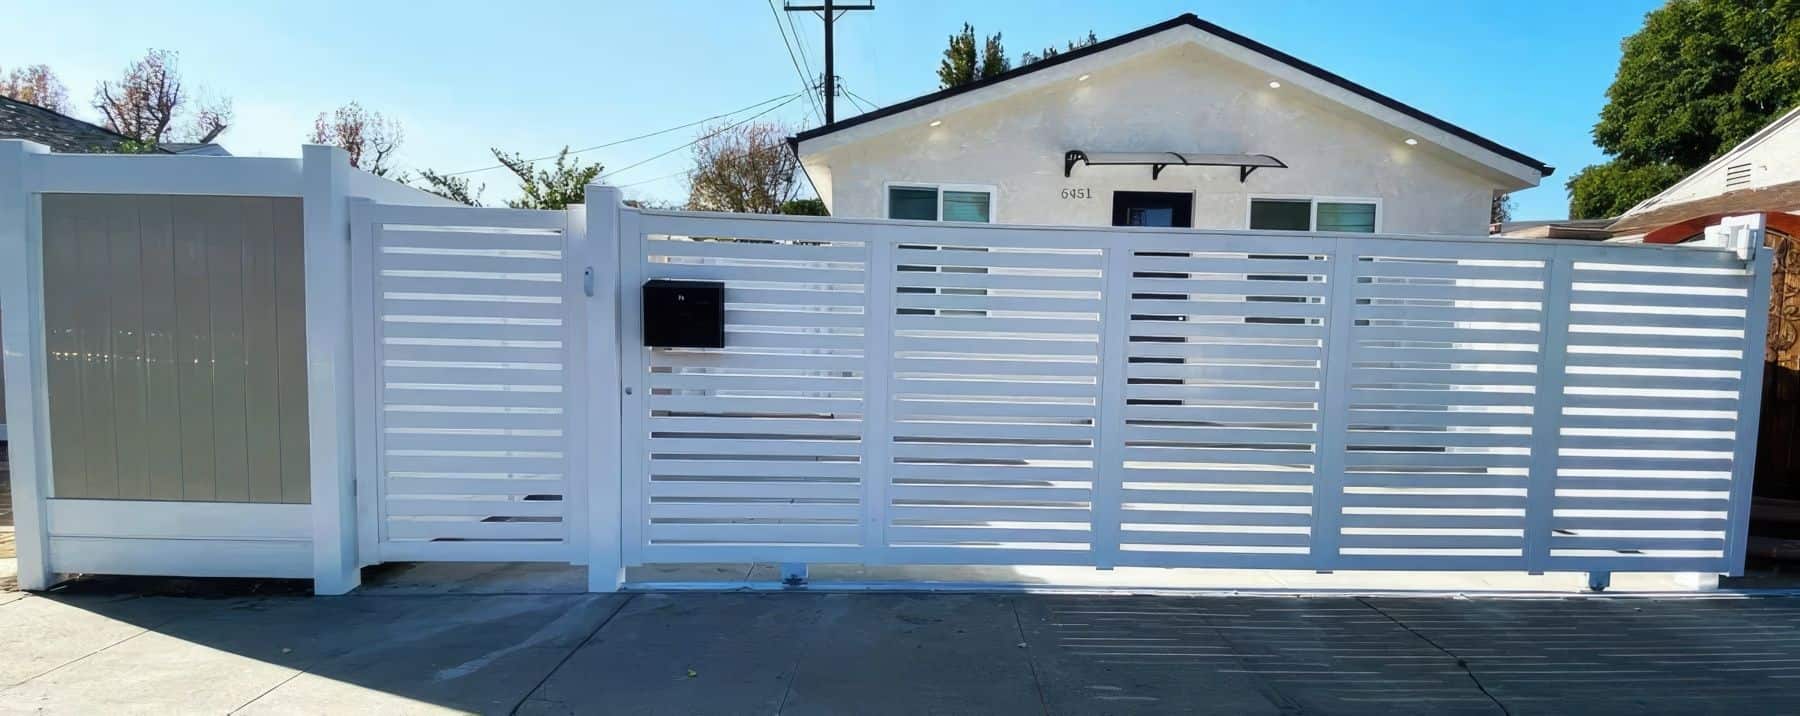 A semi-privacy vinyl rolling gate that separates the small suburban home from the sidewalk and surrounded by fences.